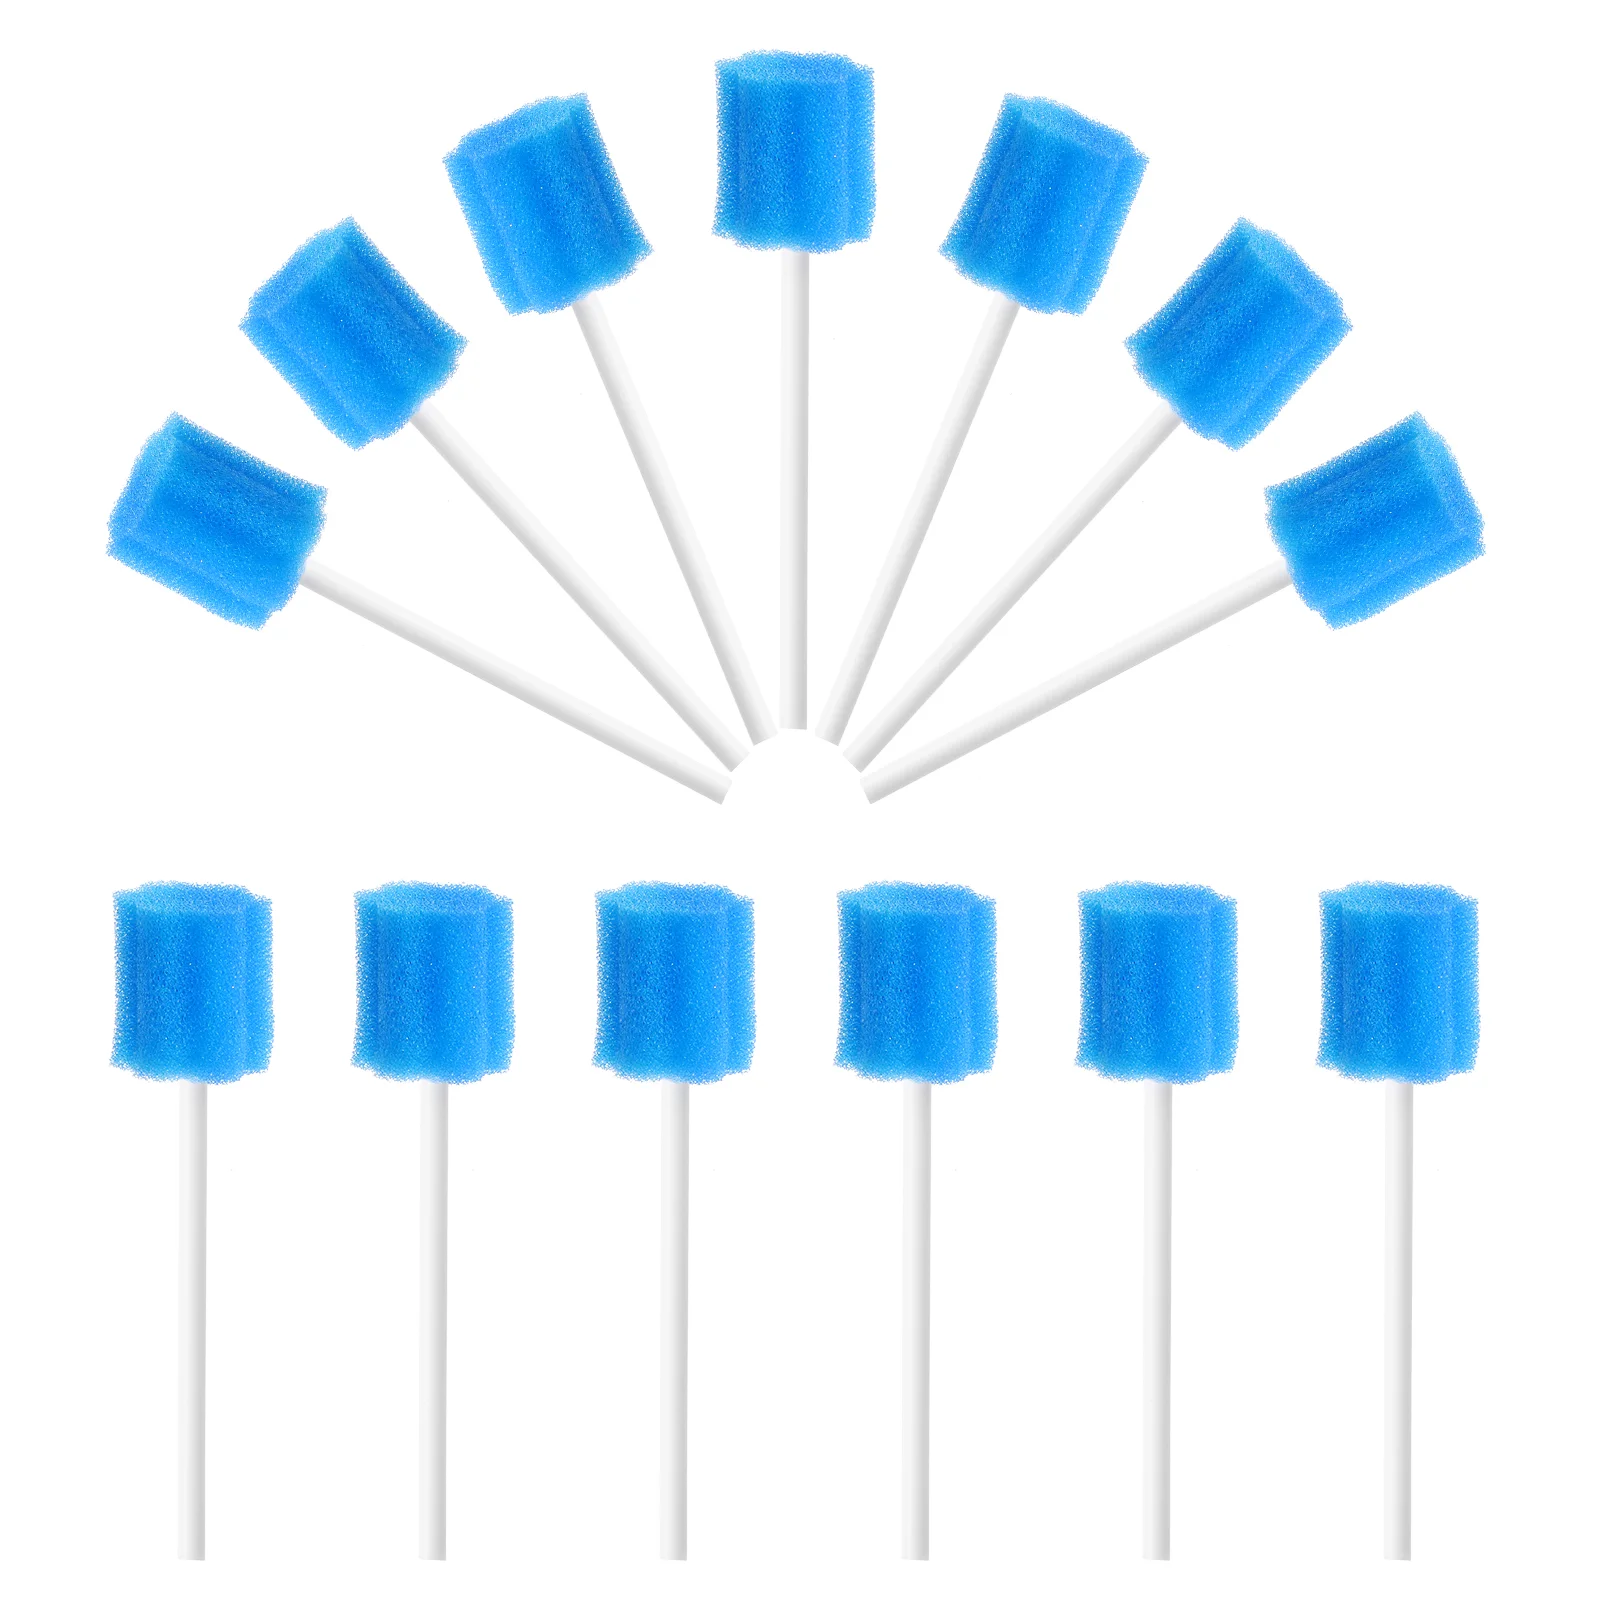 

SUPVOX 100pcs Disposable Oral Care Sponge Sticks Swabs Tooth Cleaning Mouth Swabs Practical Mouth Care Swabs Vaapes